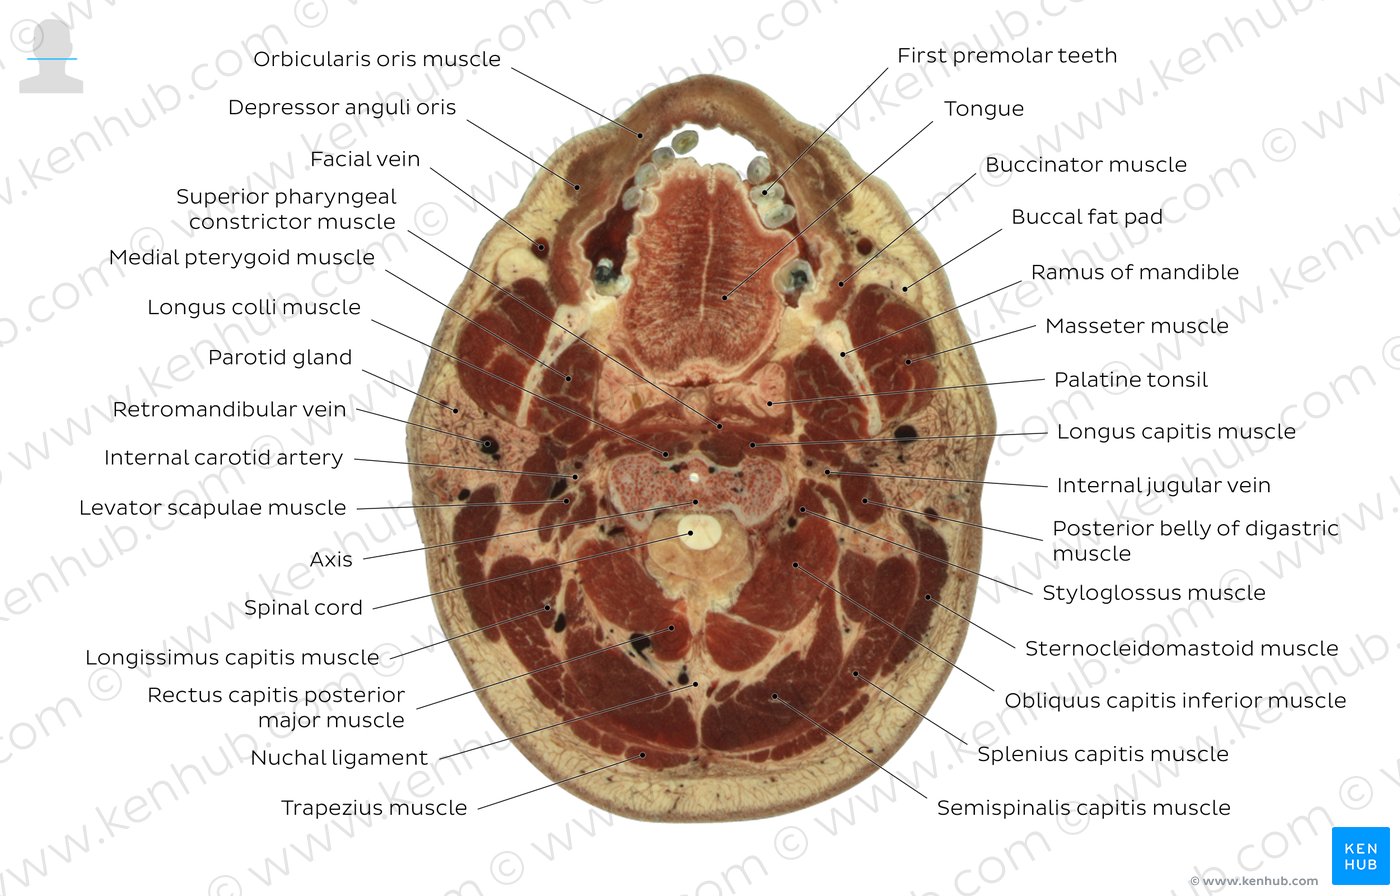 Cross section through the tongue and C2: Diagram